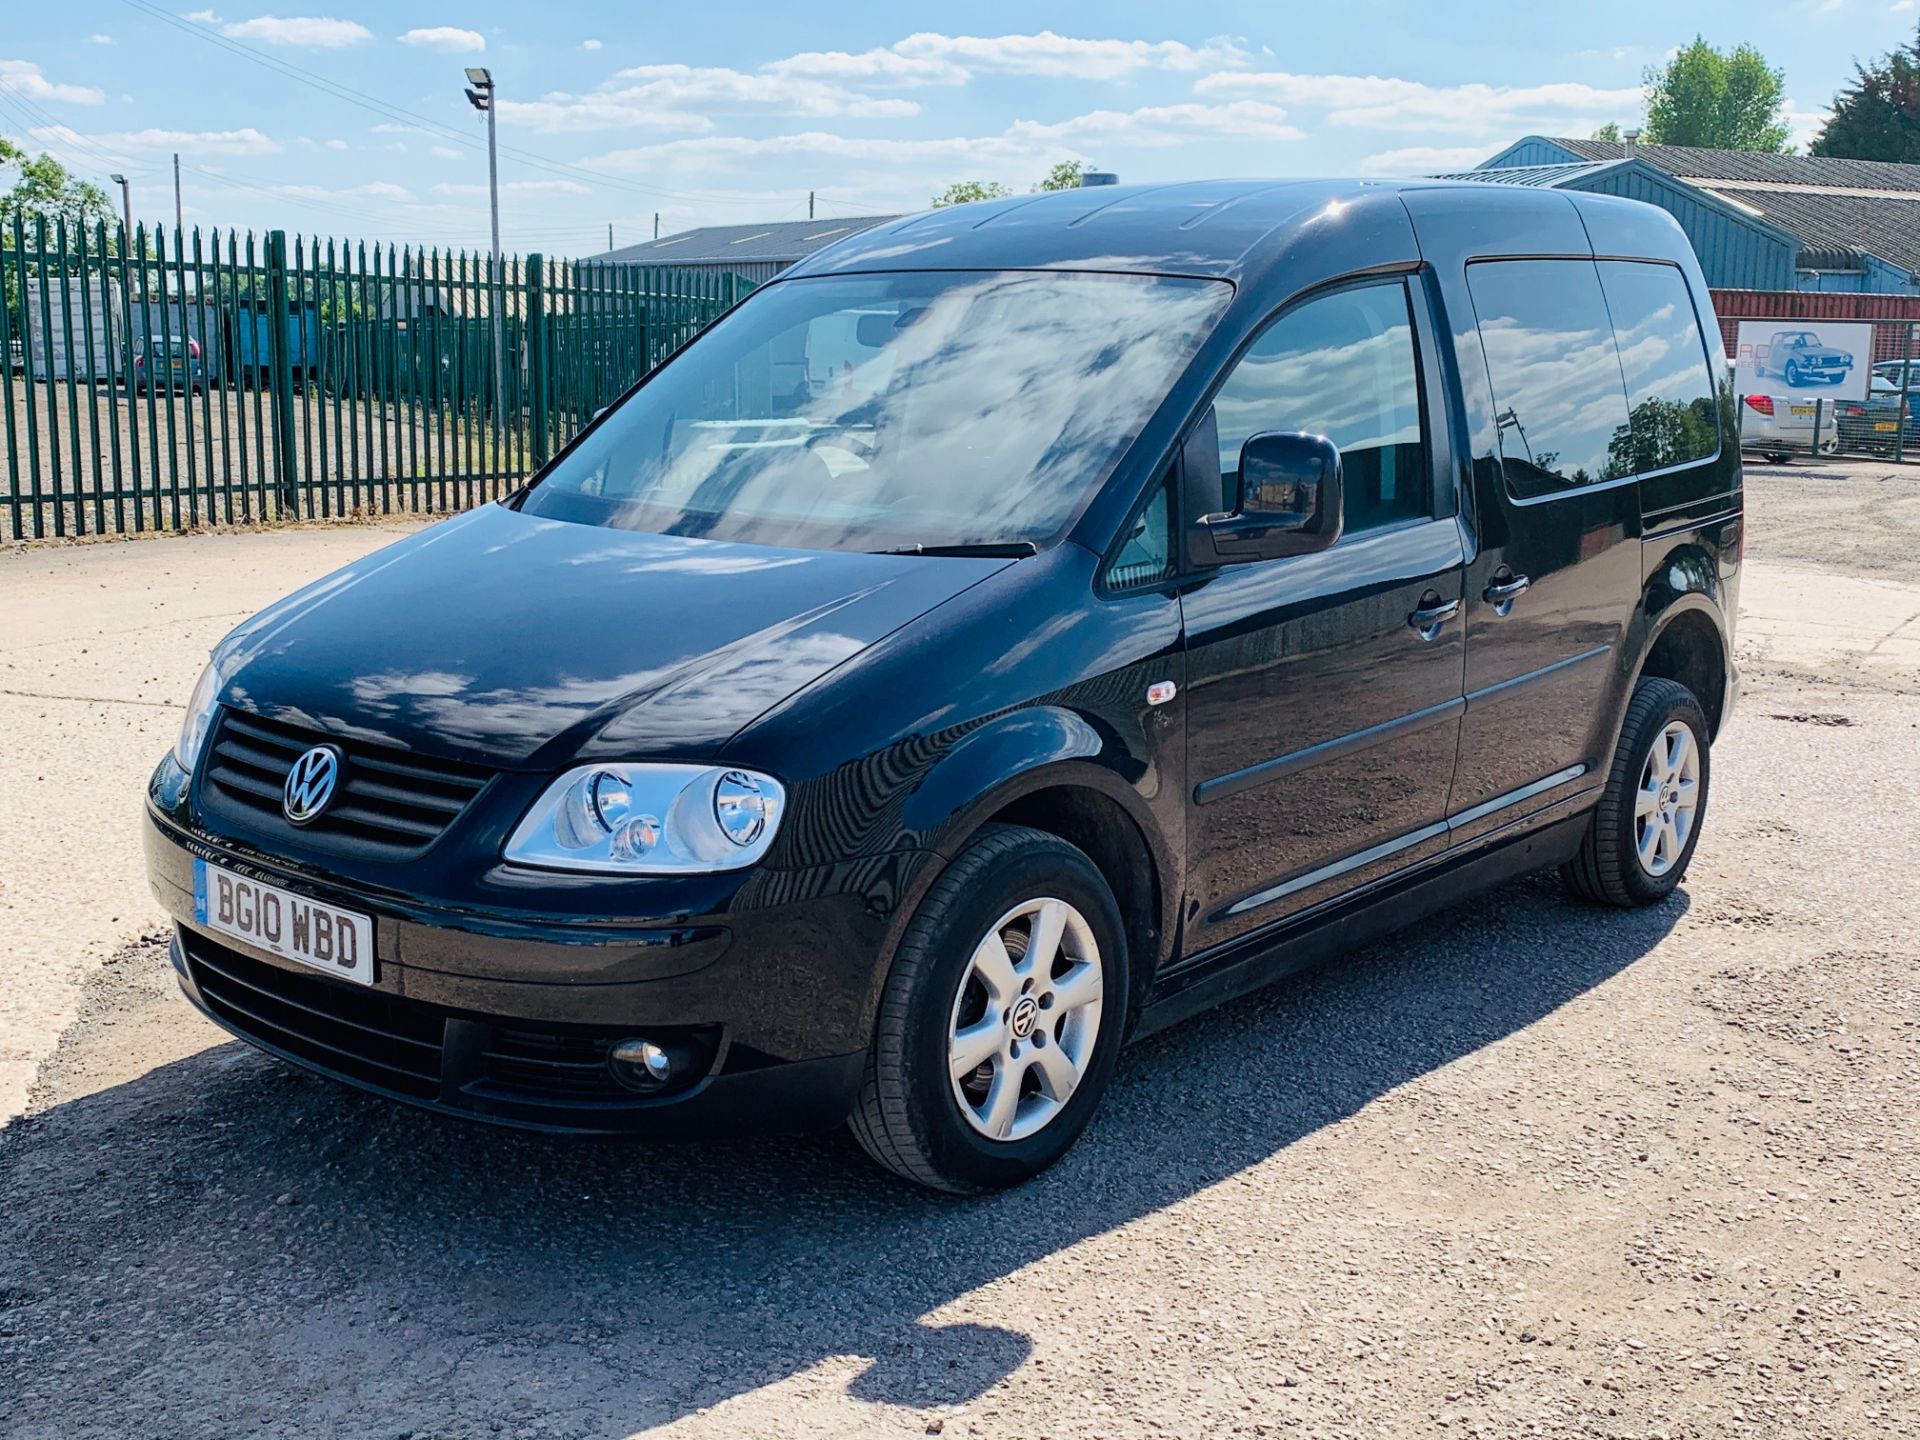 (ON SALE) VW CADDY 1.9TDI "LIFE" DSG AUTO-WHEELCHAIR ACCESSIBLE VEHICLE - ONLY 42K MILES!! - NO VAT! - Image 4 of 15